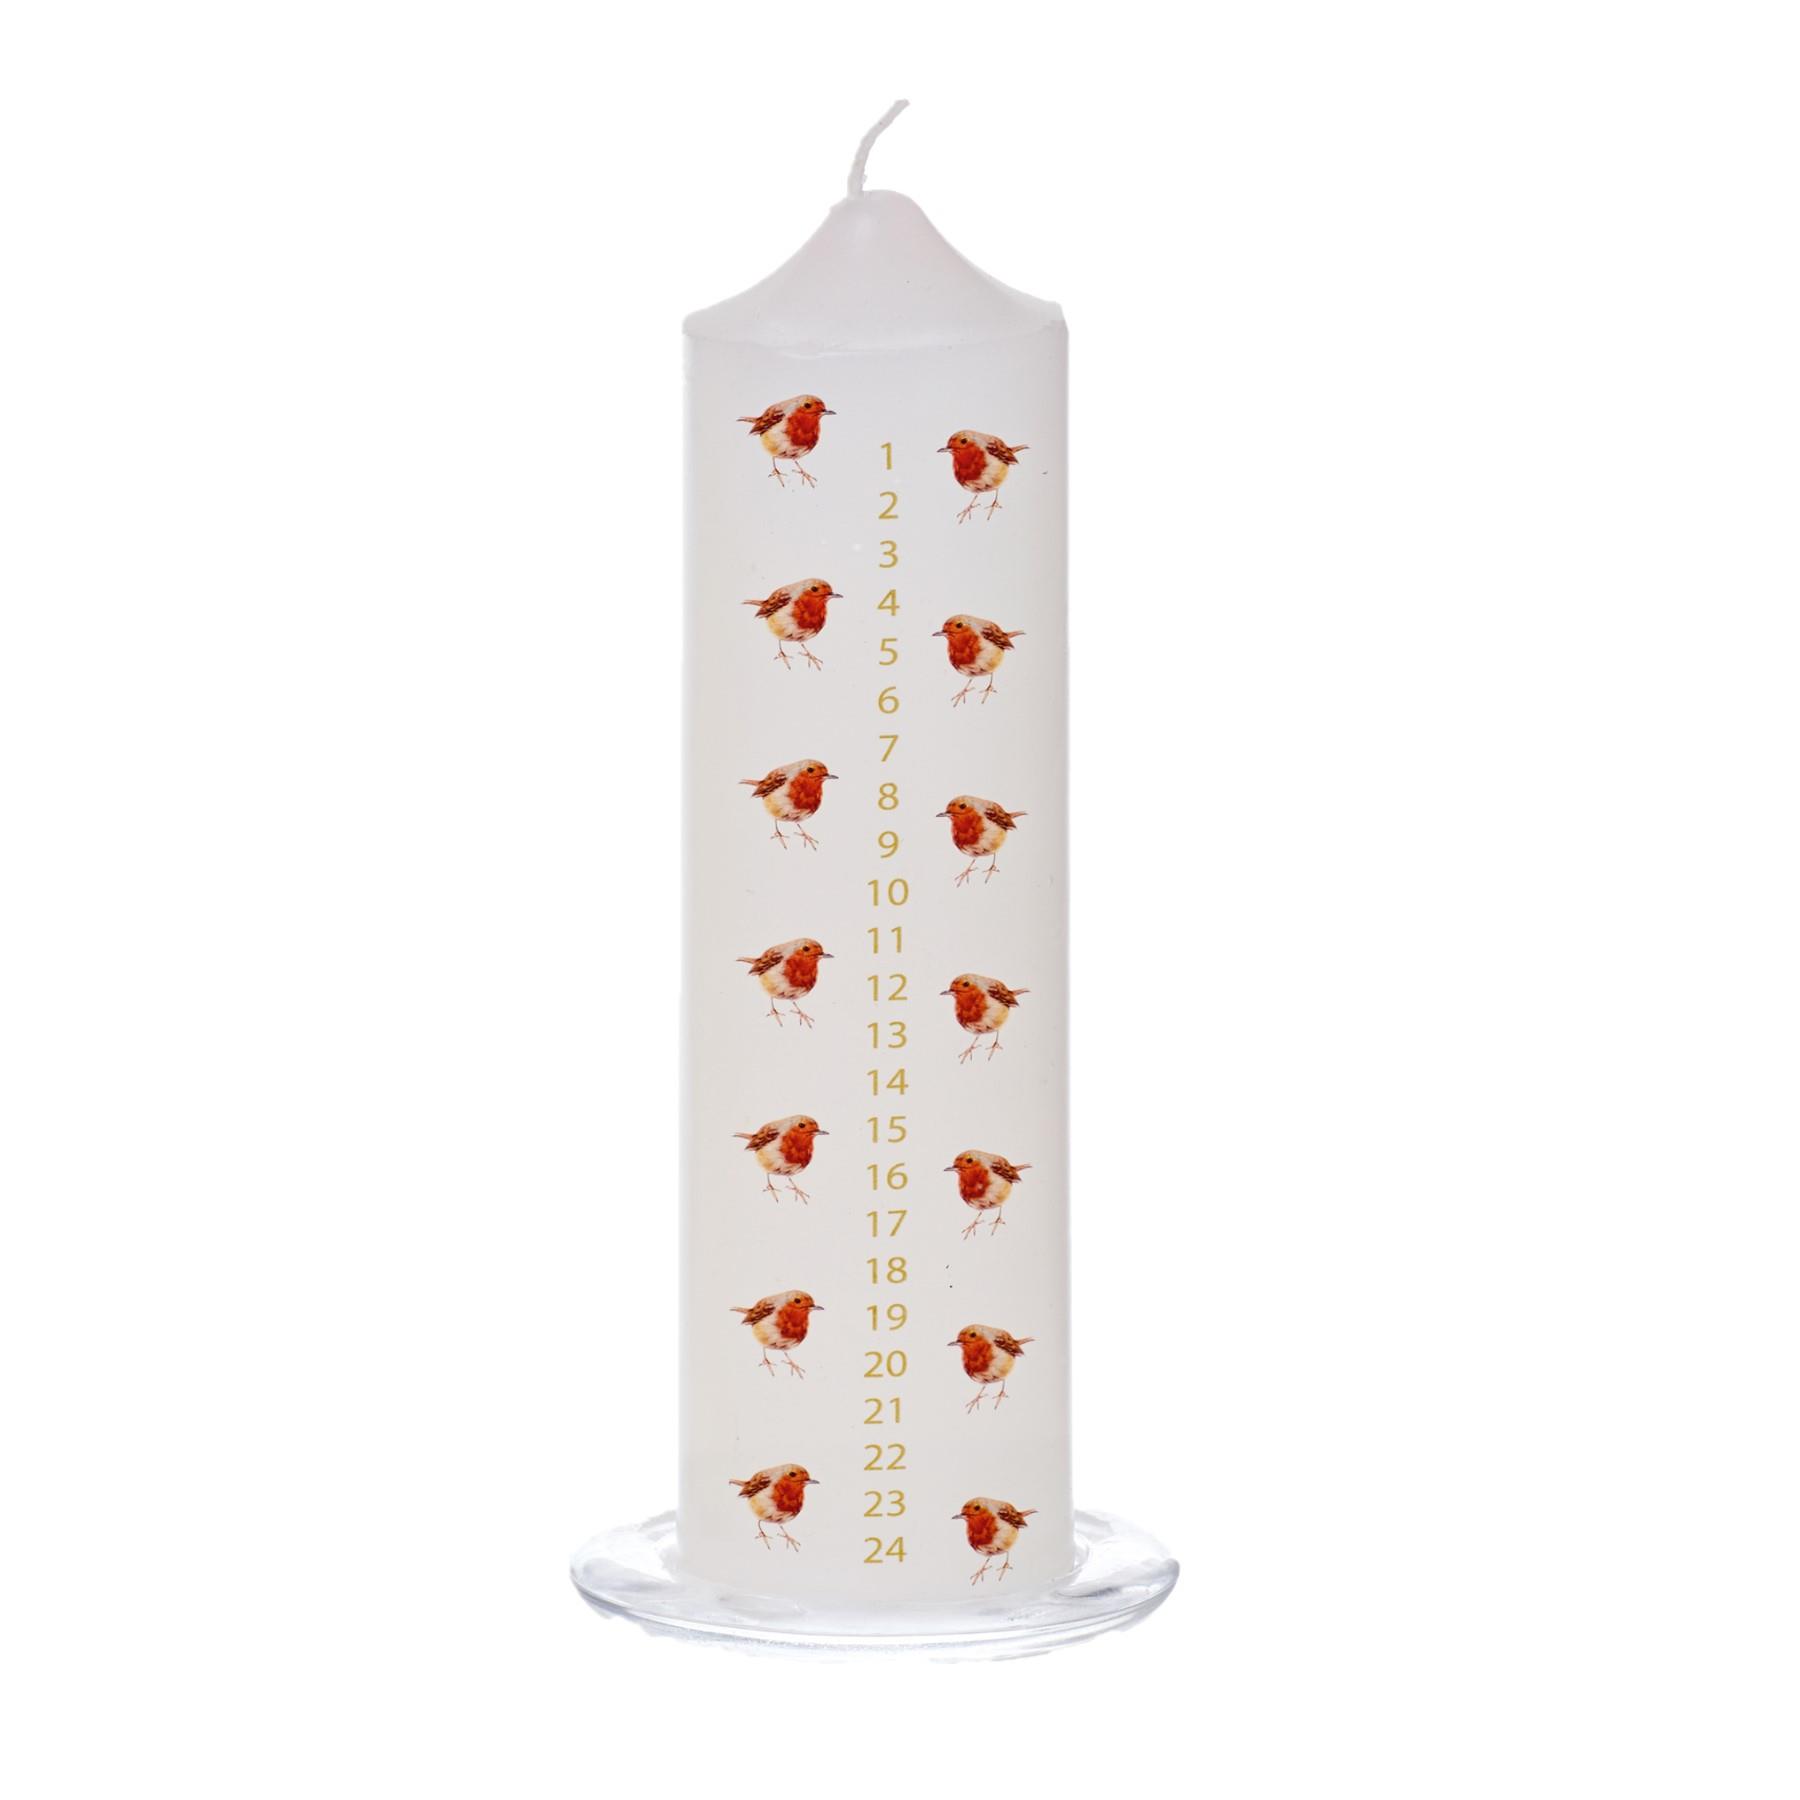 20cm Christmas Advent Candle with Robin Image on Glass Tray - White